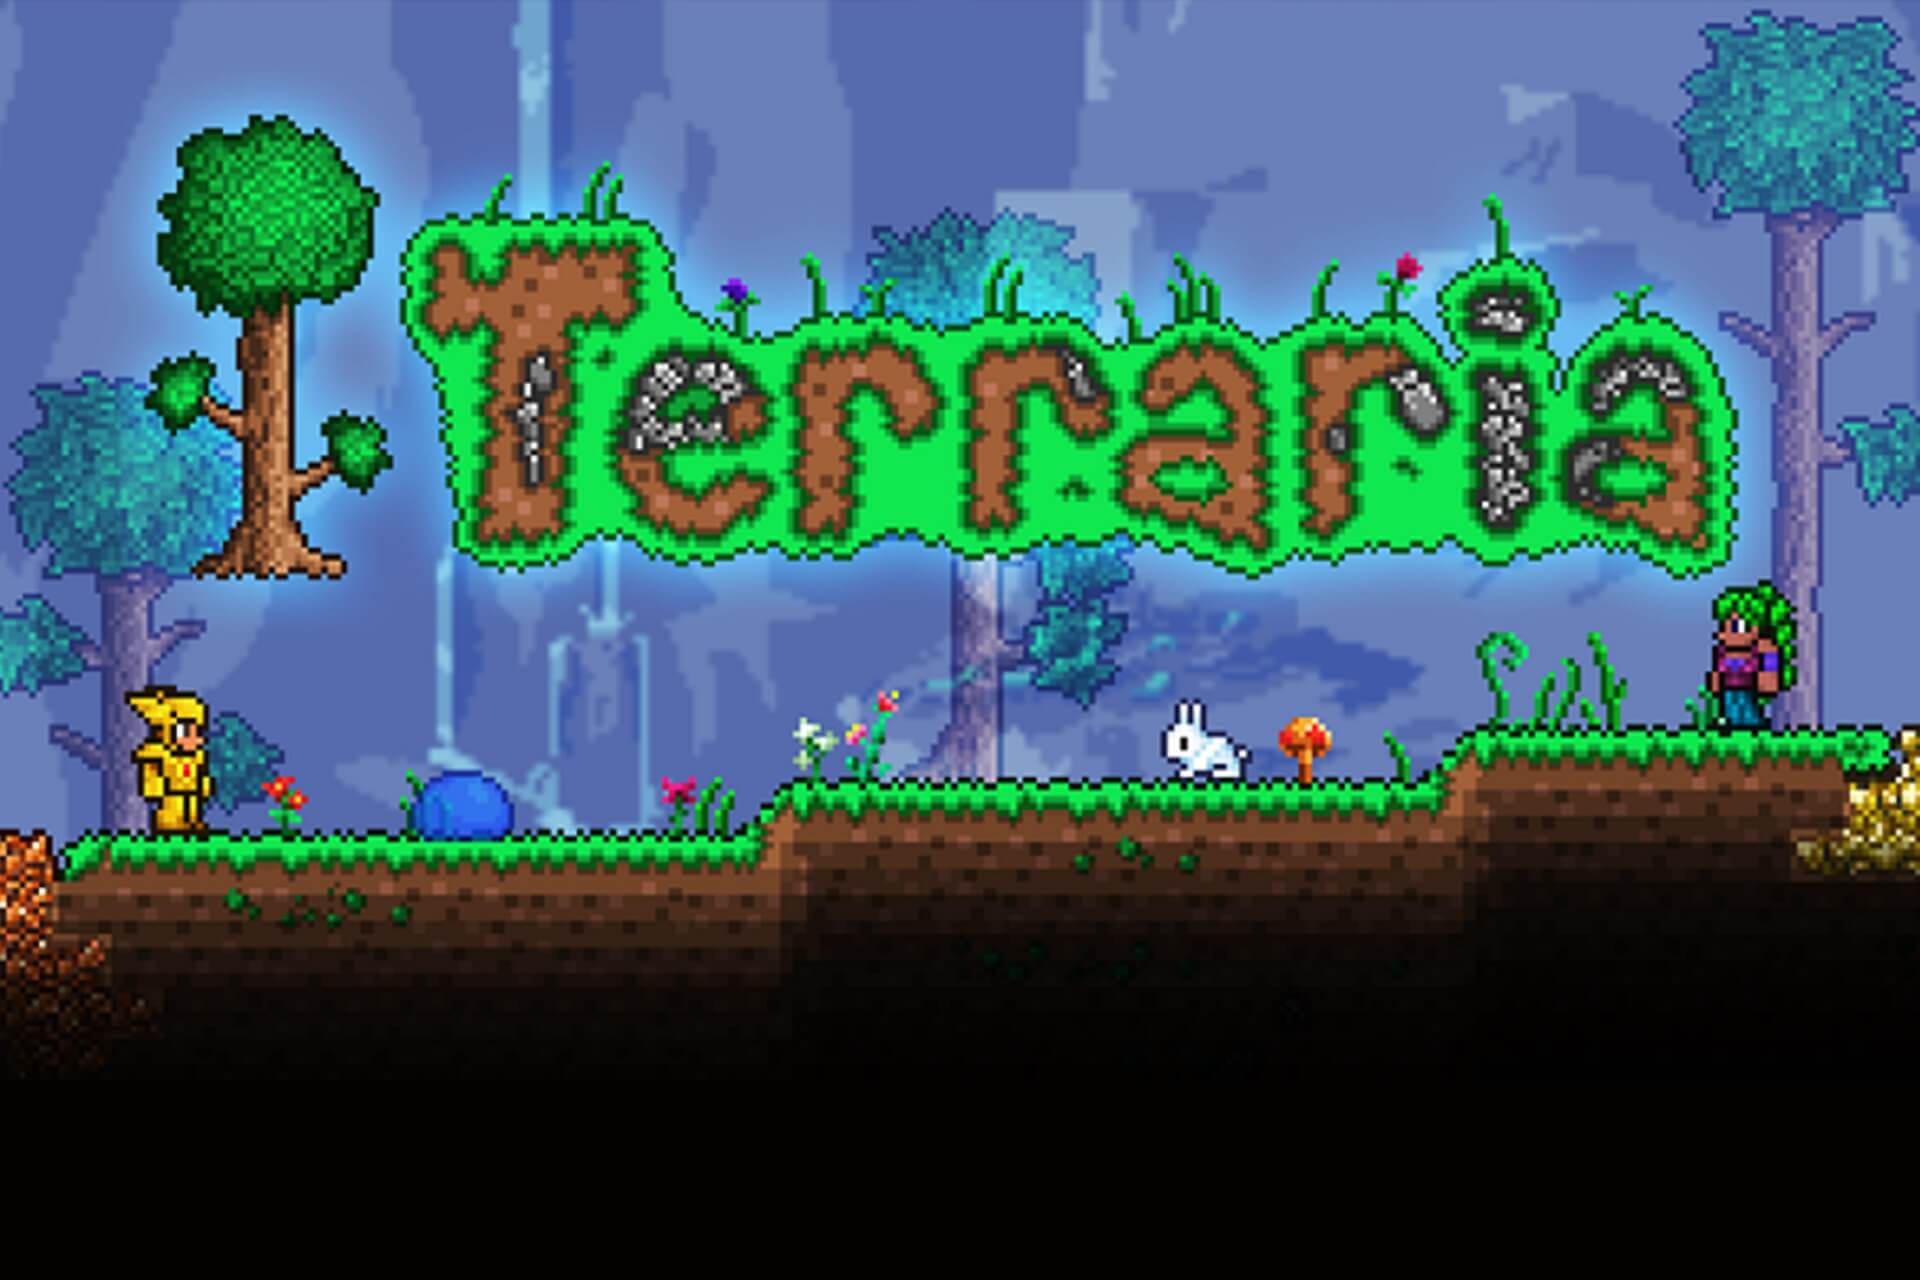 Use a VPN to play Terraria and reduce ping